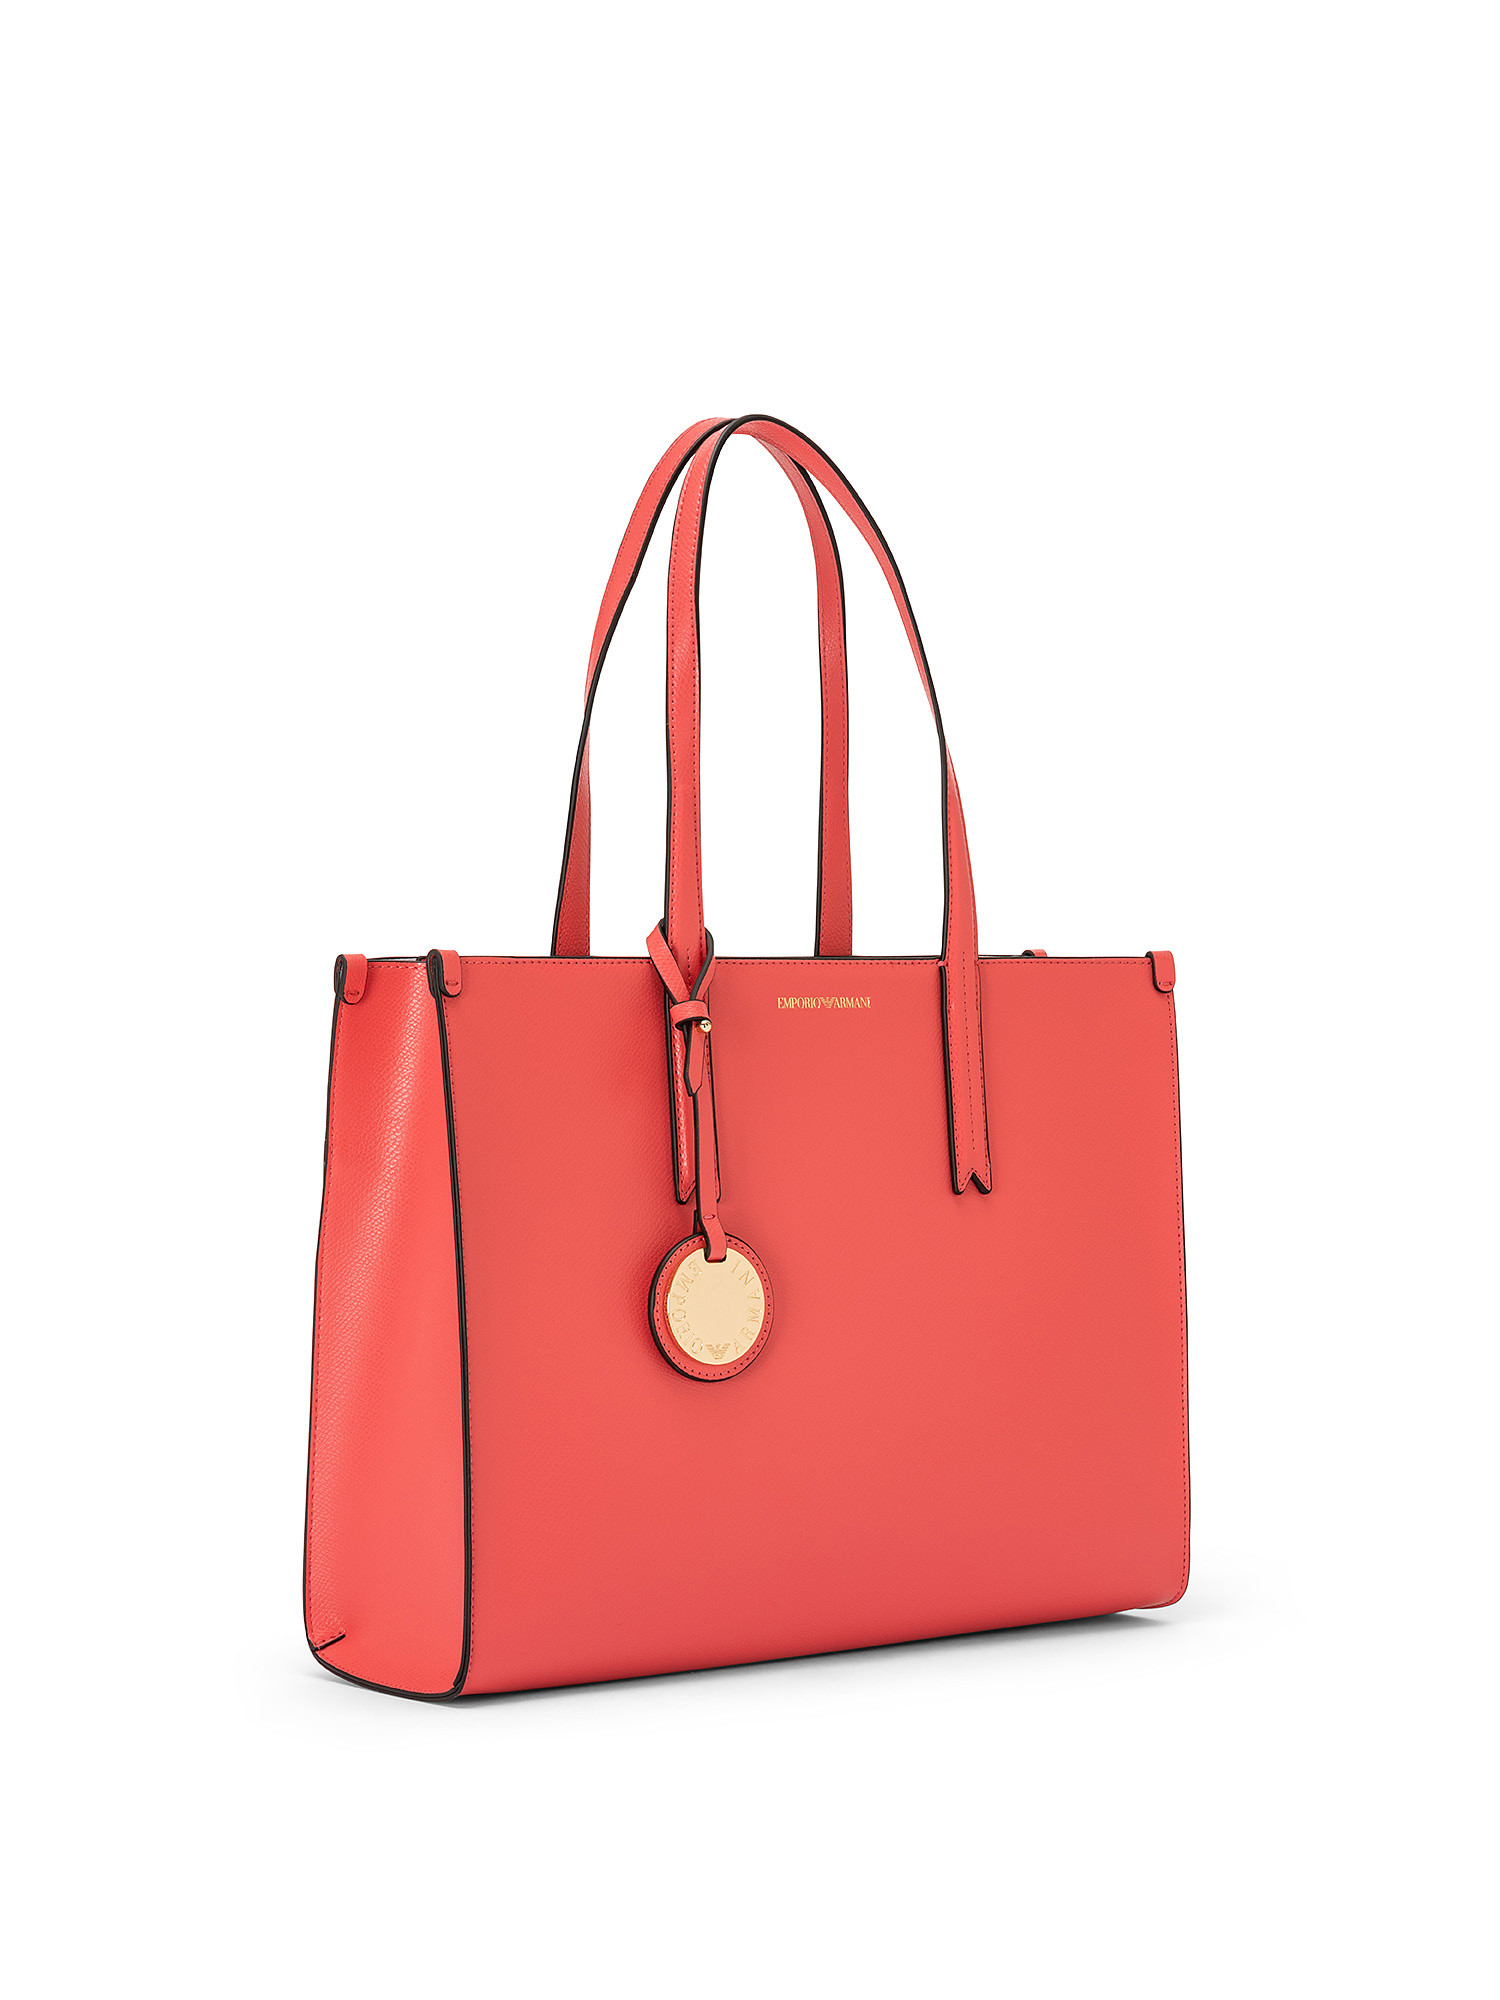 Shopping bag, Rosso corallo, large image number 1